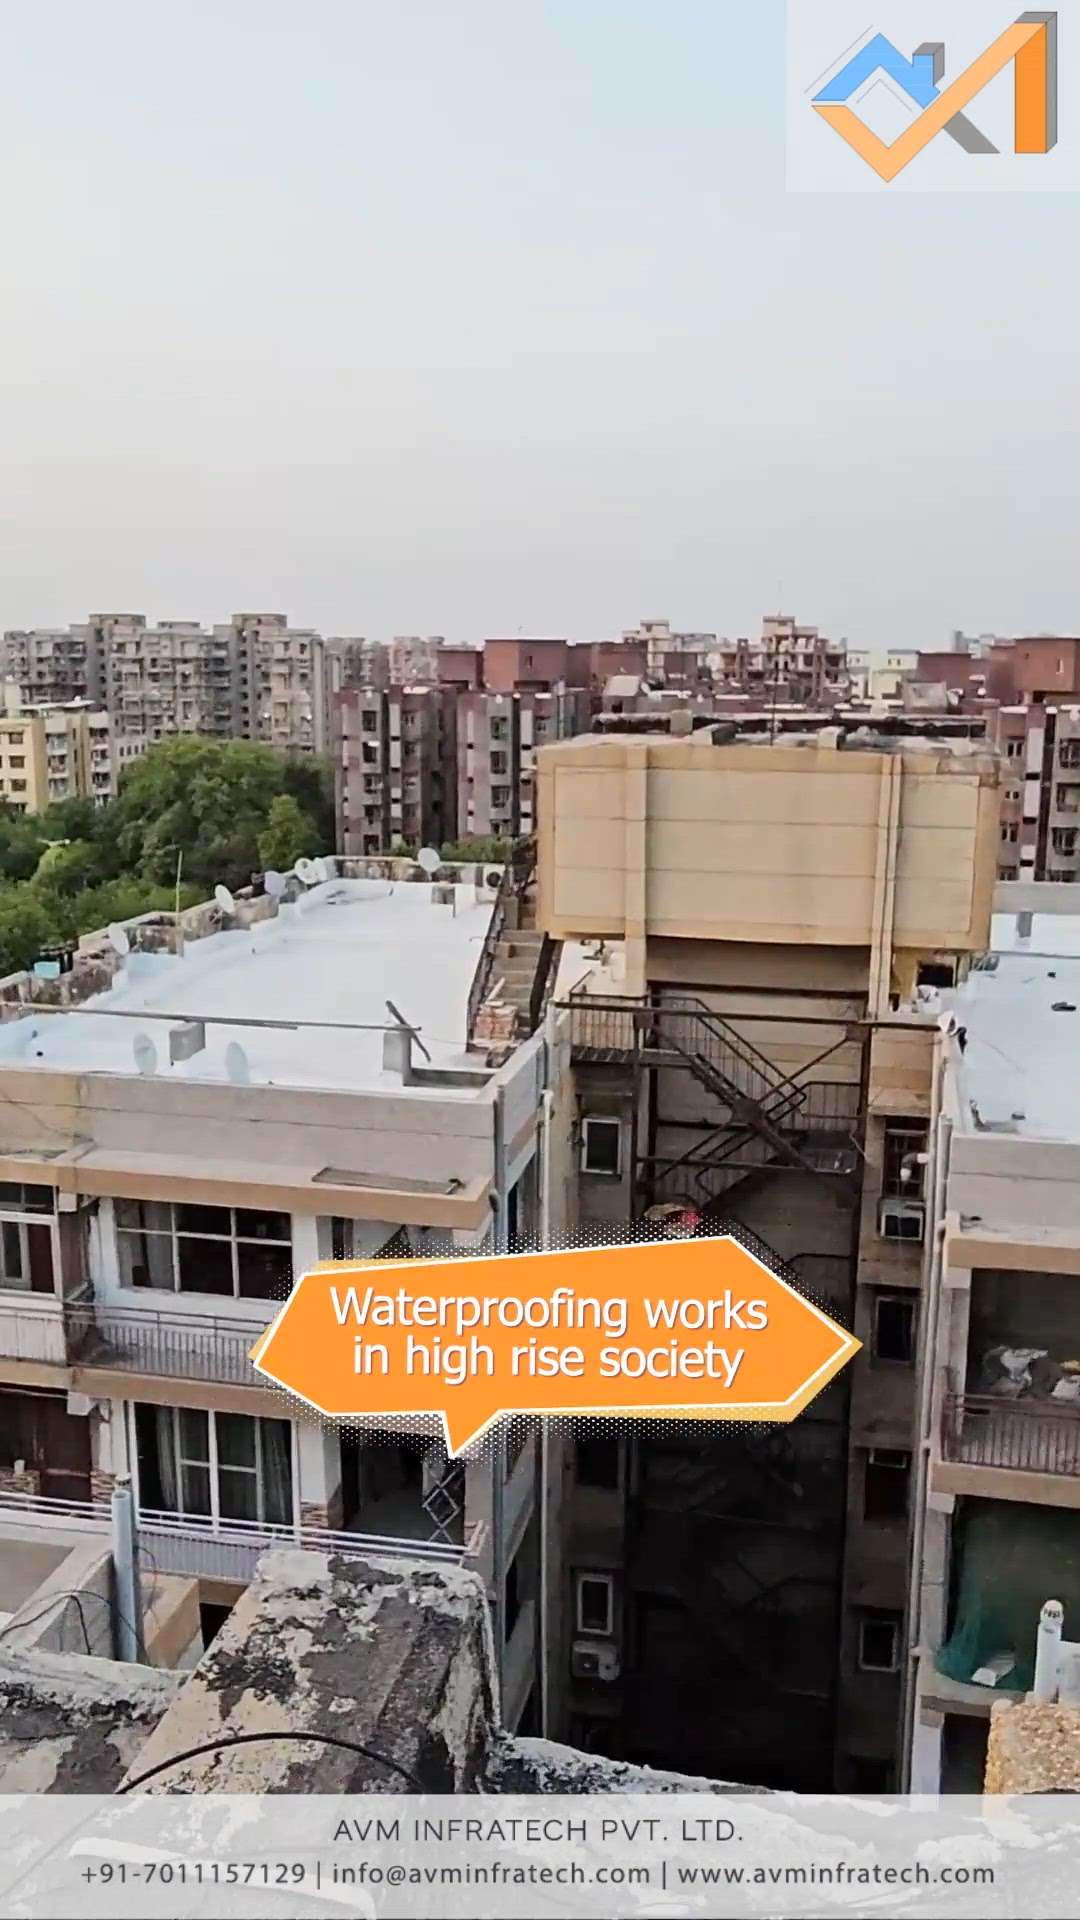 Terrace Waterproofing with high strength fiber reinforced elastomeric liquid.


Follow us for more such amazing updates. 
.
.
#terrace #terracedesign #terracegarden #terracehouse #terracegardening #terracedecoration #terracewaterproofing #roof #roofleak  #roofleakrepair #roofleaking #terraceleakage #leakage #waterseepage #avminfratech